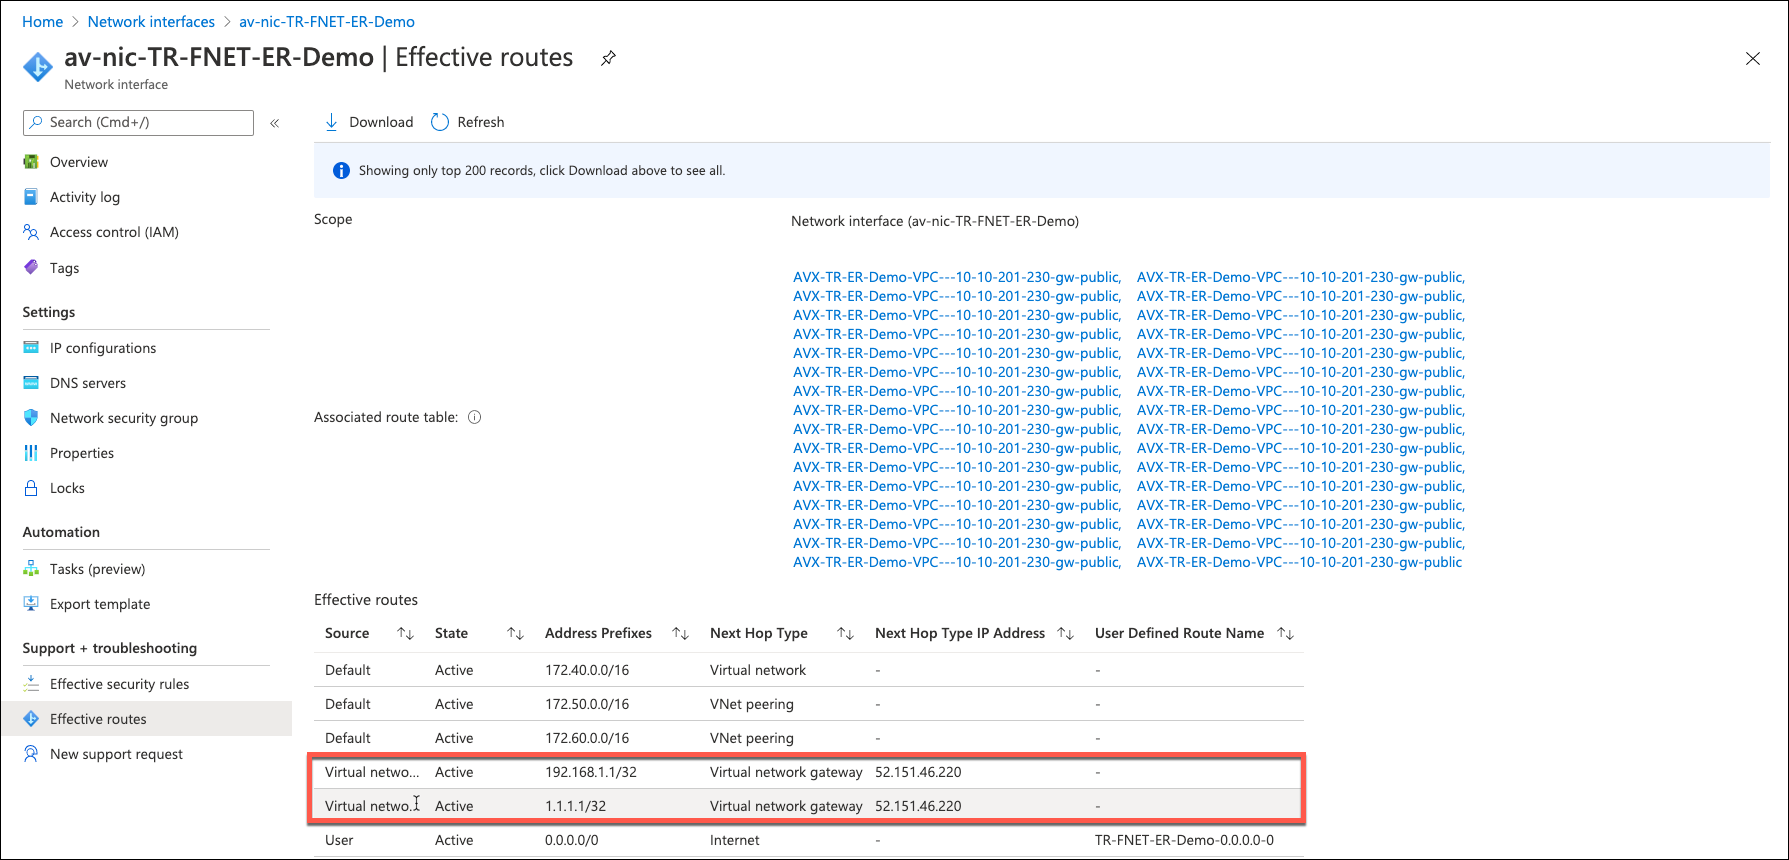 azure_effective_routes_routing_entry